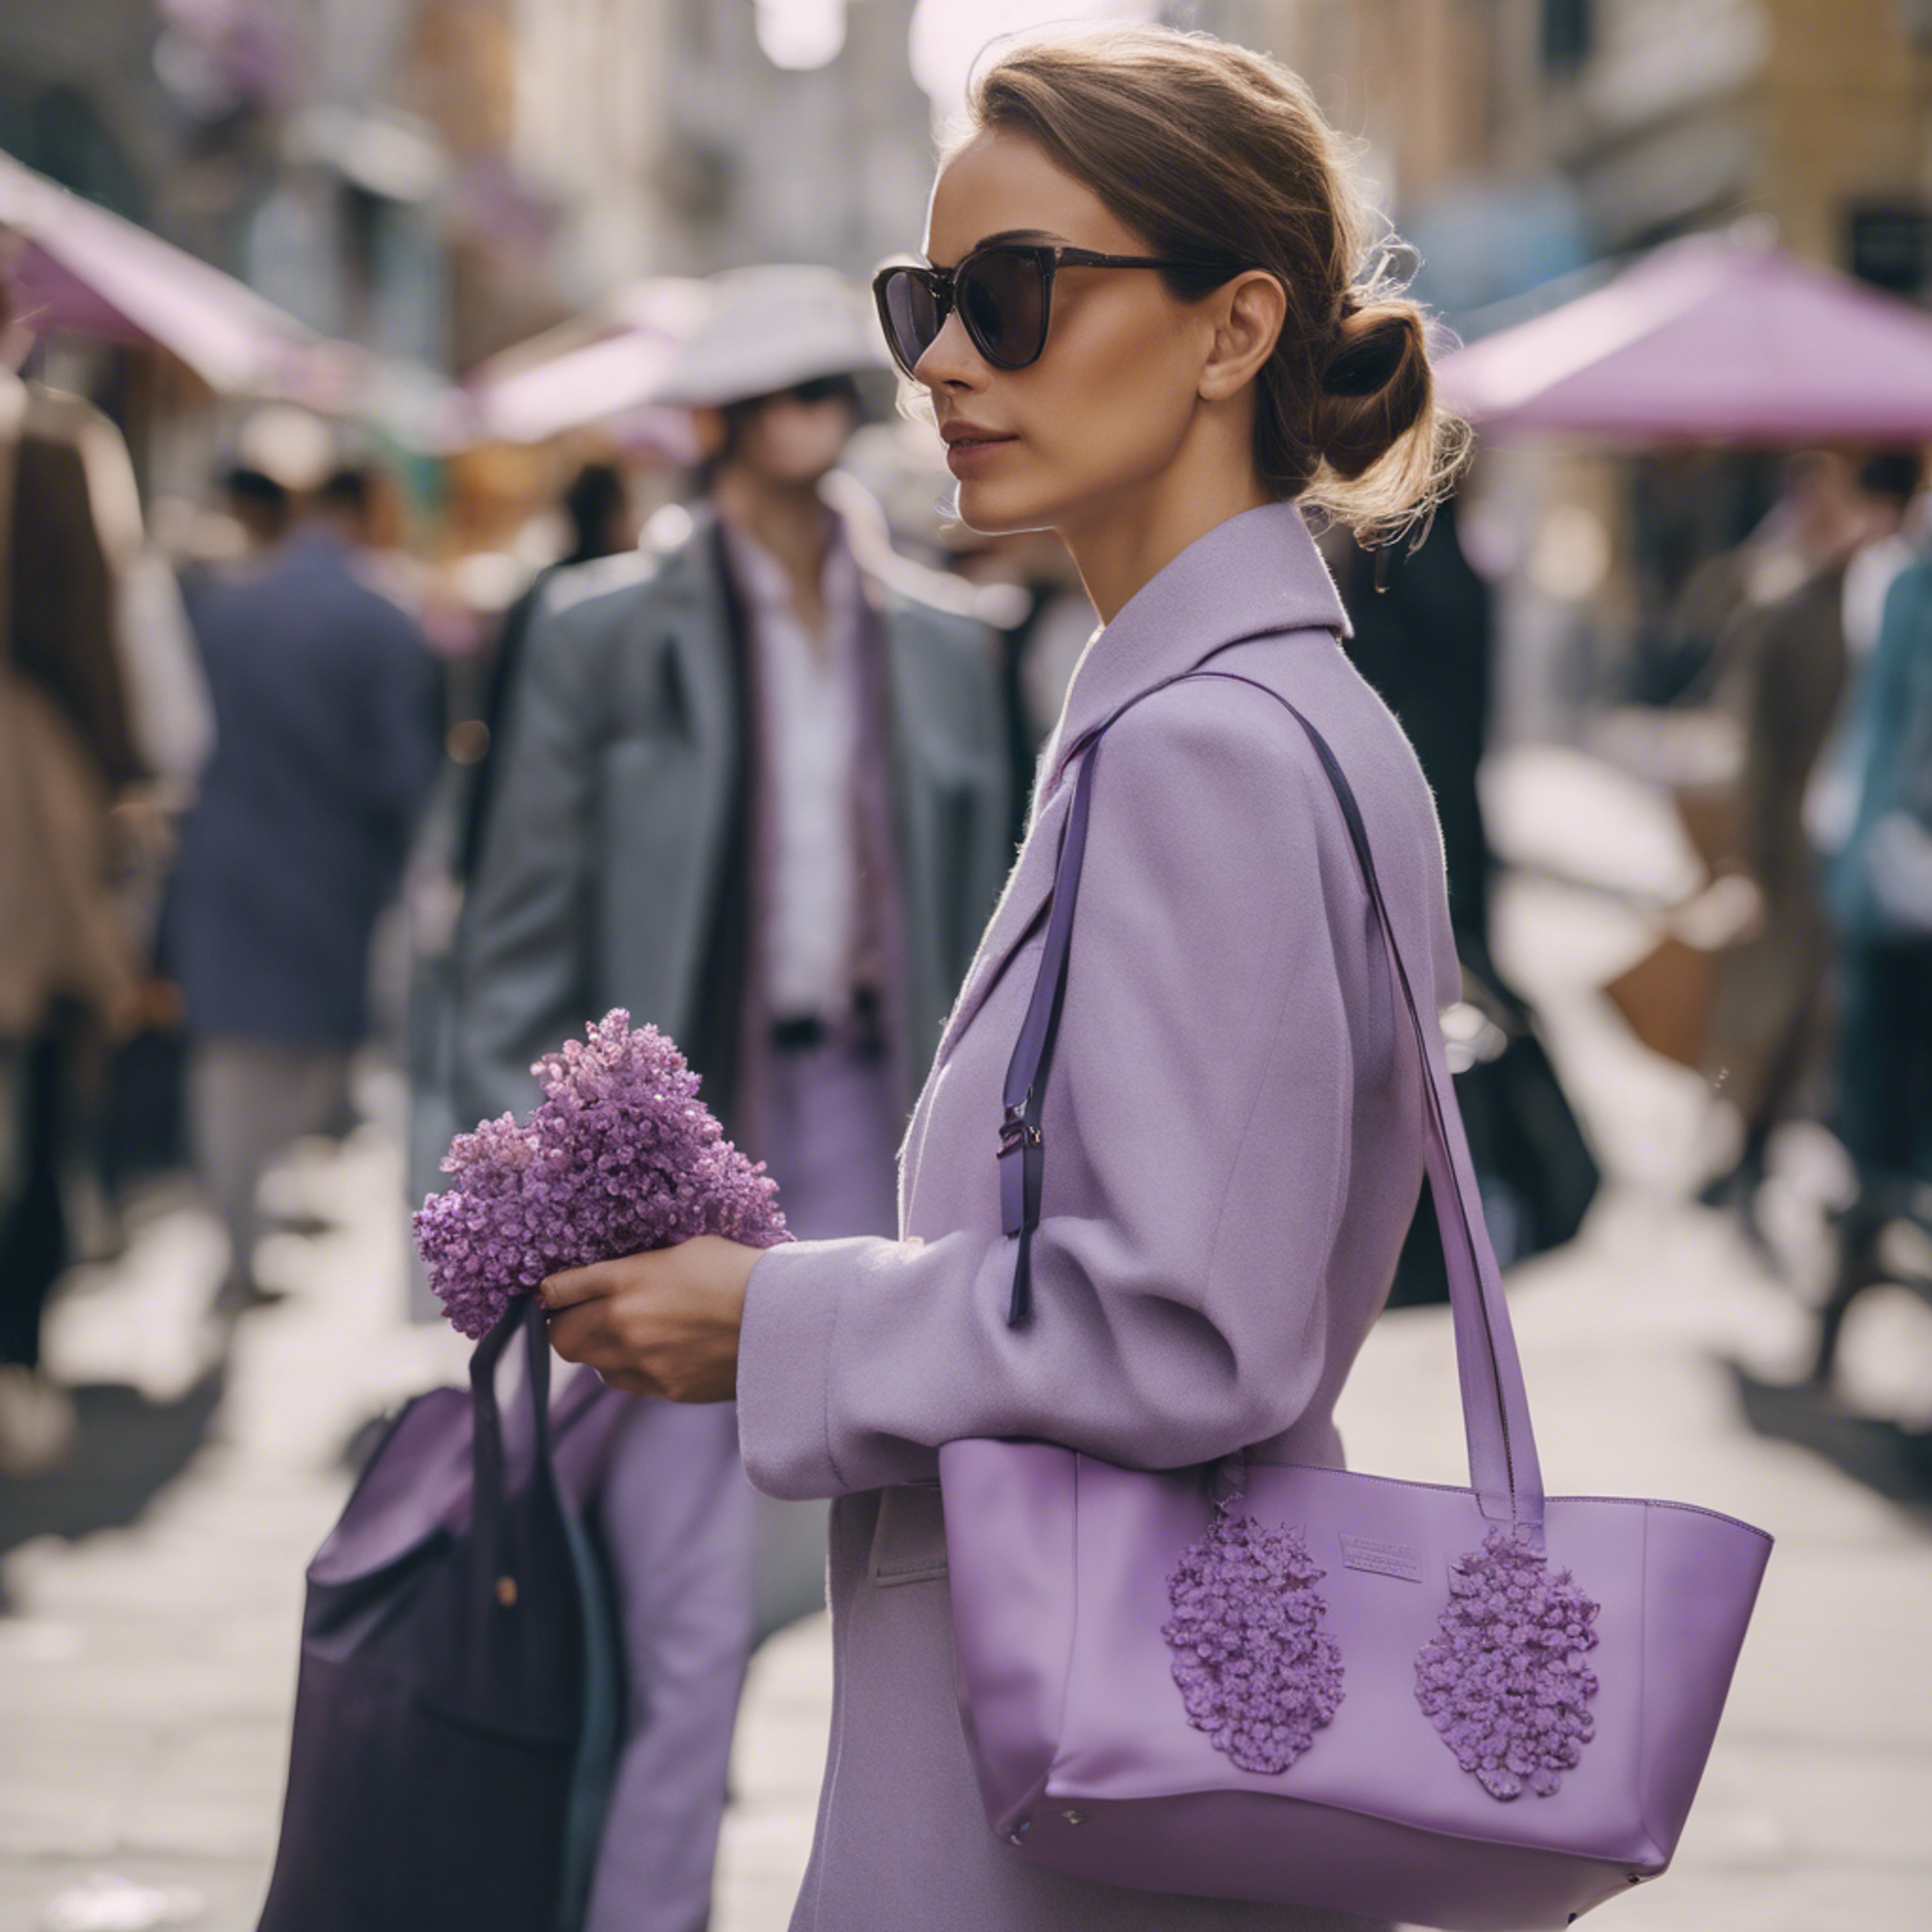 An elegant lady carrying a preppy lilac tote bag while walking along a crowded city street. Валлпапер[fda66da185c34bc685d3]